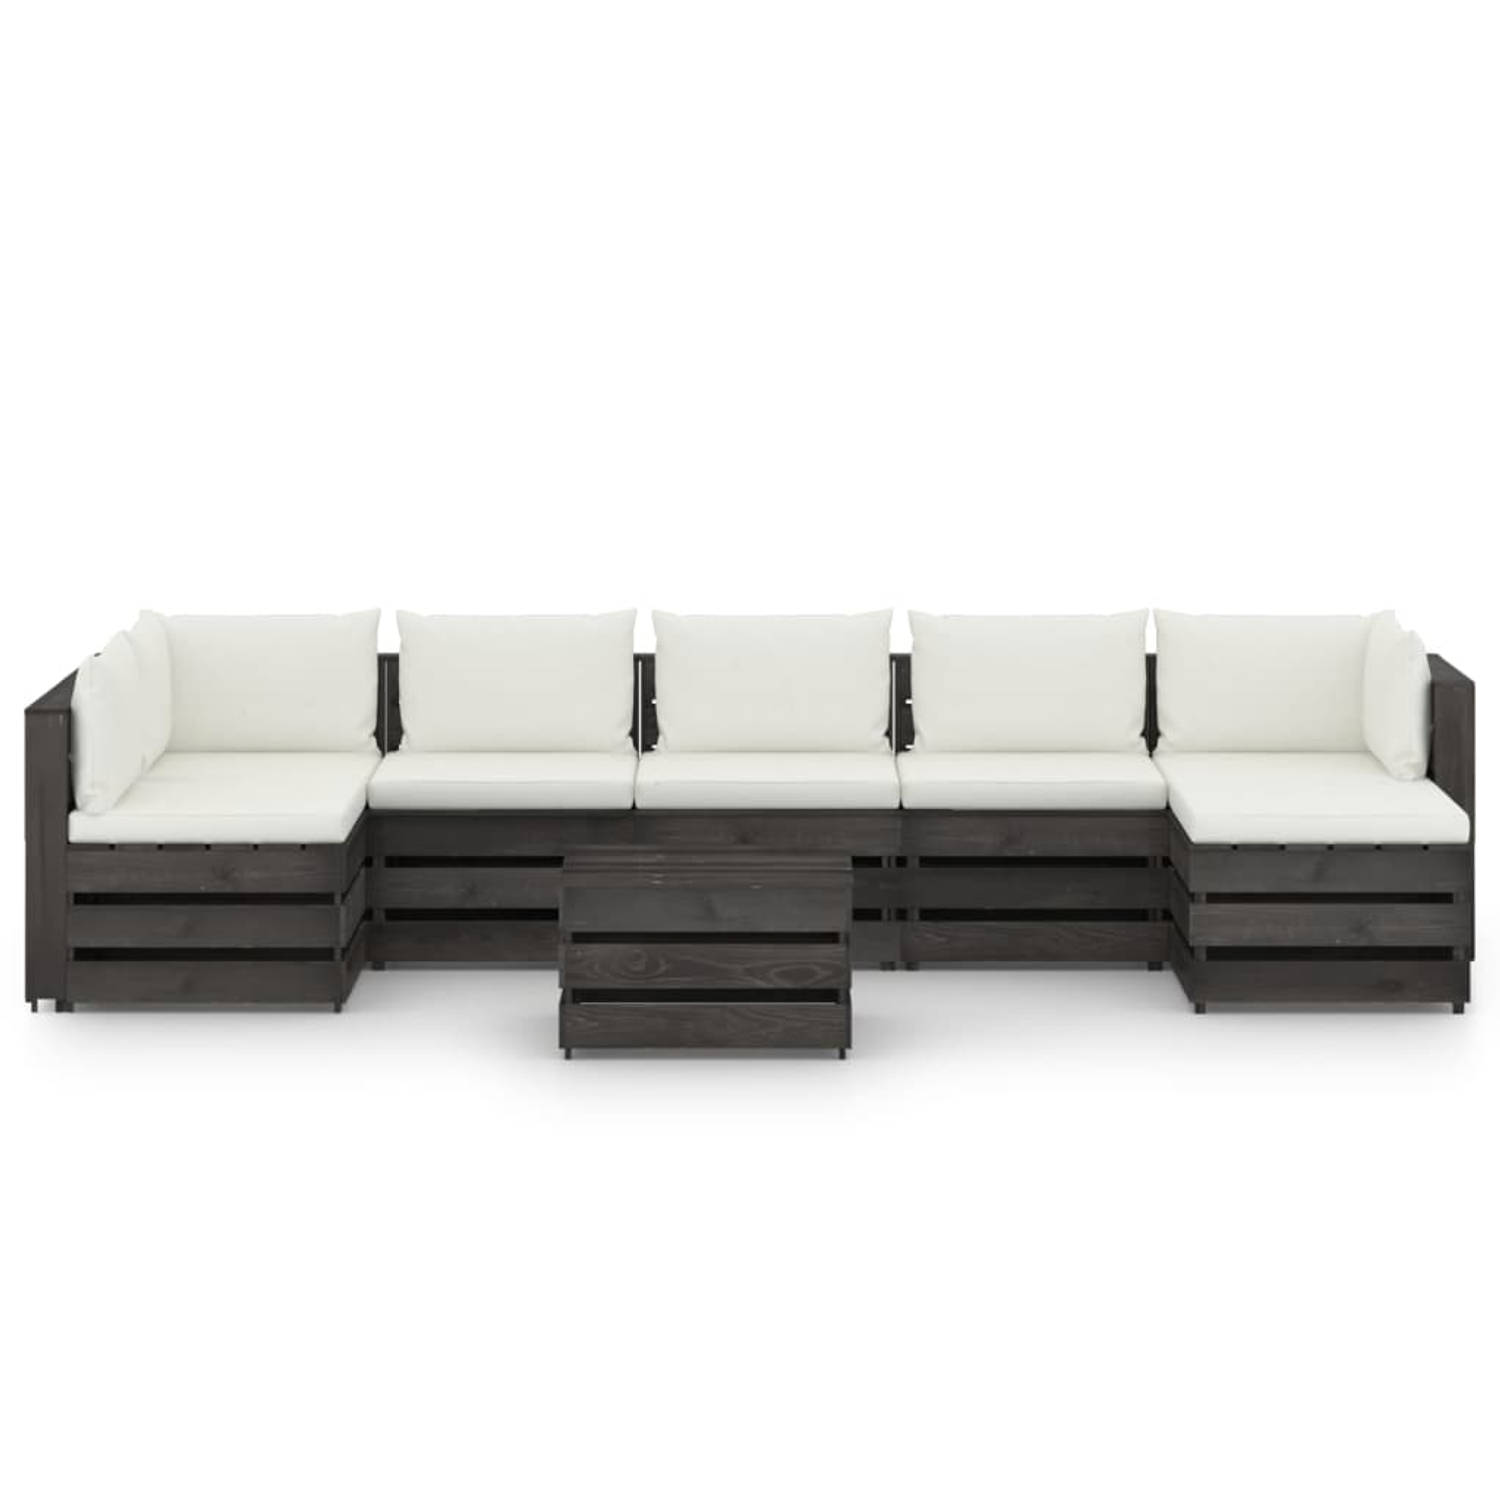 The Living Store Pallet Loungeset - Grenenhout - Modulair - Crèmewit kussen - Afmeting- 69 x 70 x 66 cm - The Living Store